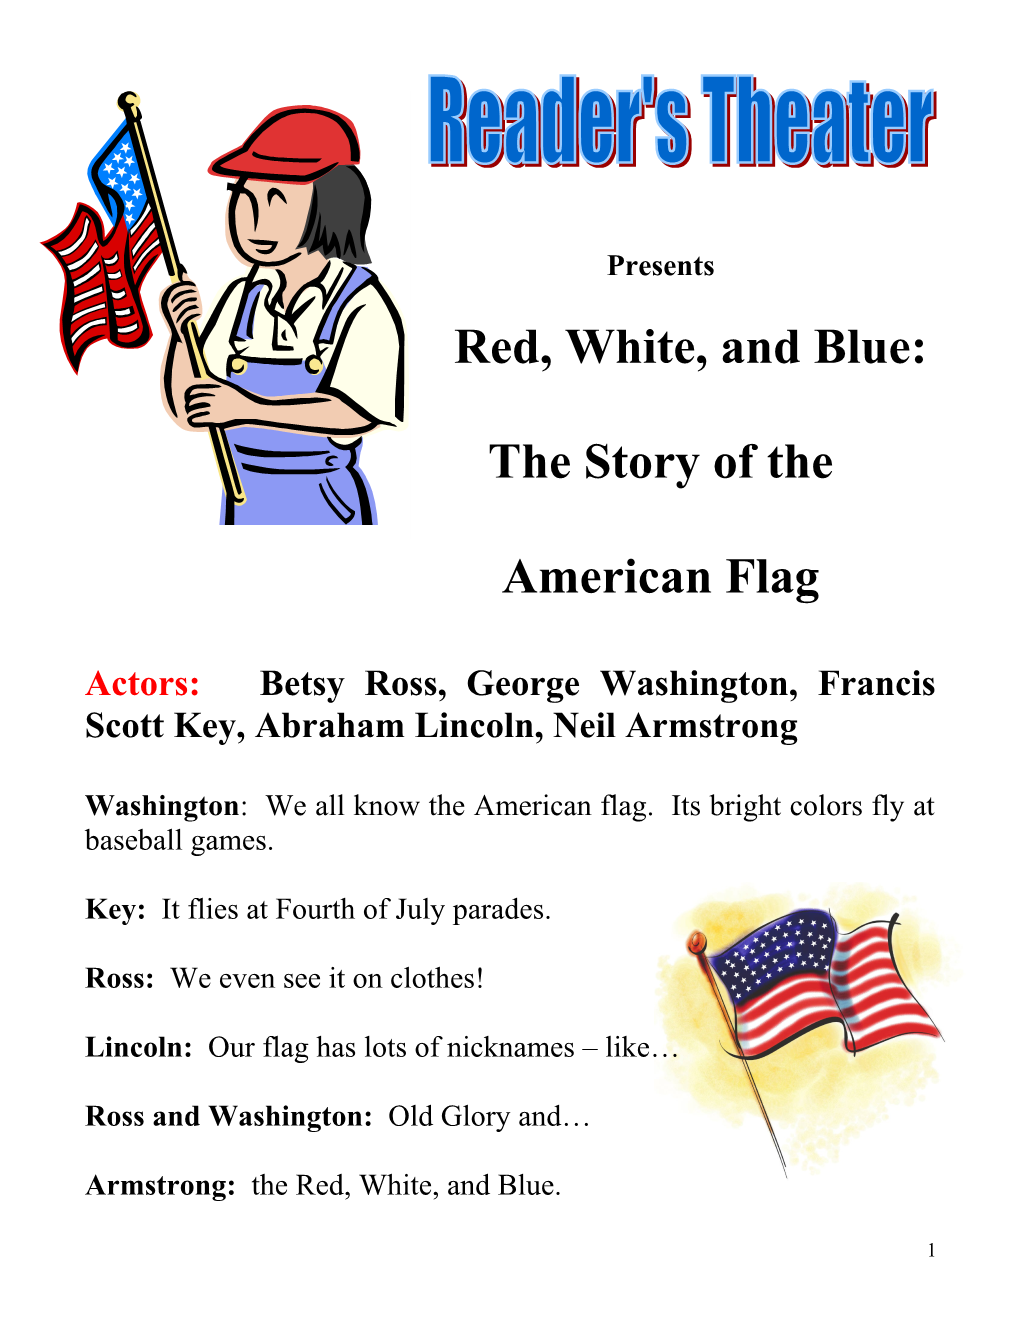 Red, White, and Blue: the Story of the American Flag s1